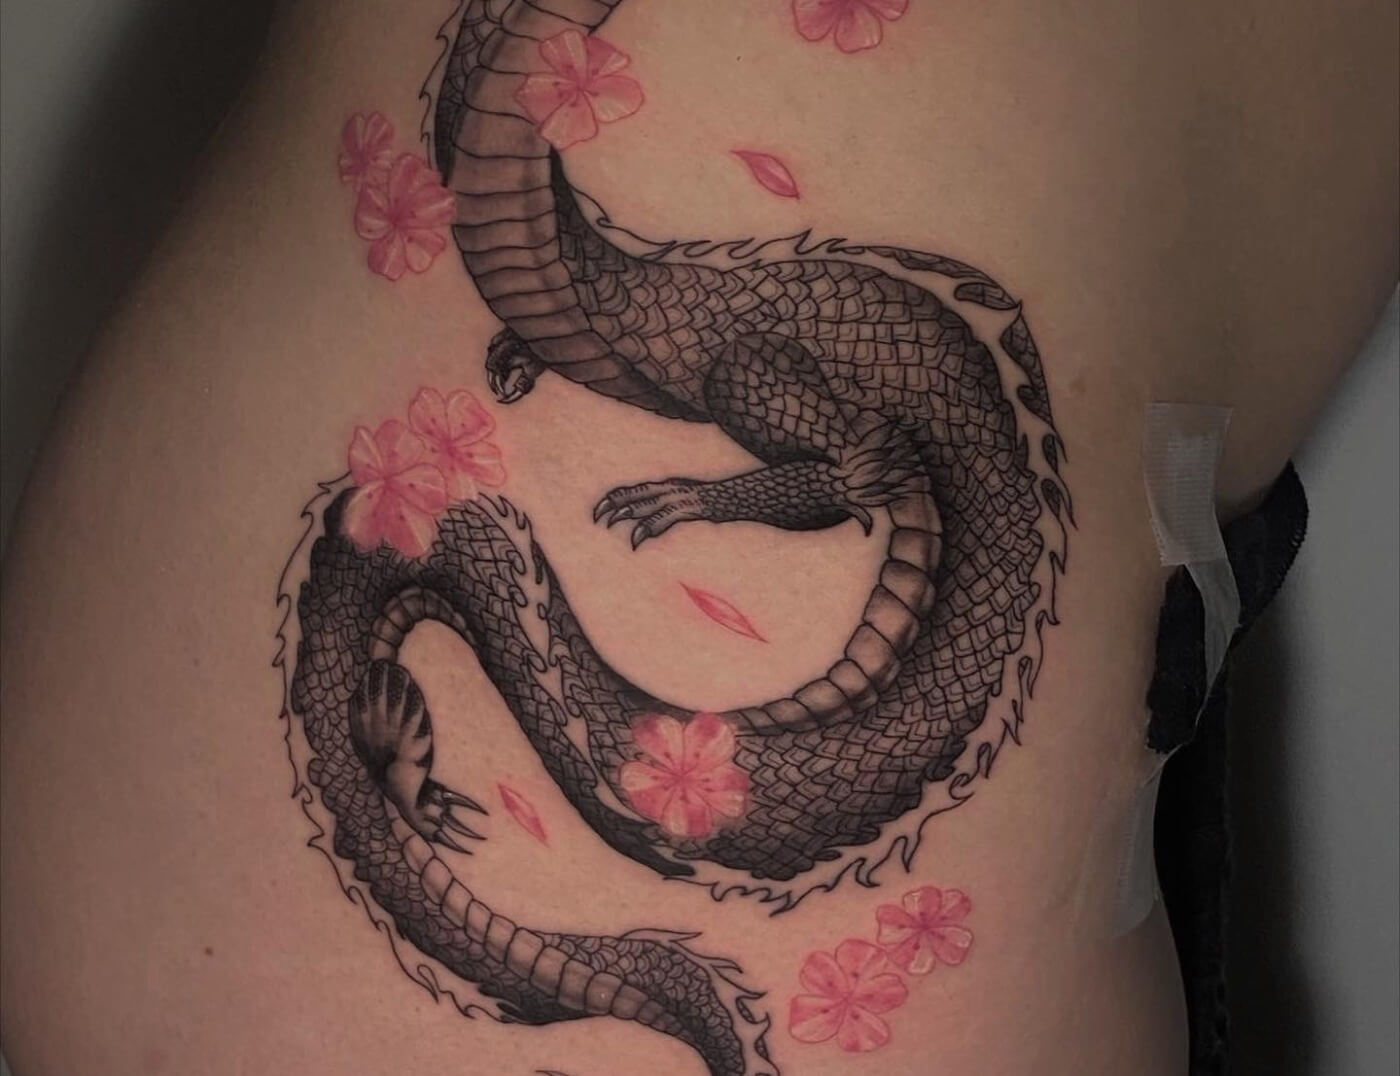 Rene did this black & grey tattoo for 𝑪𝑶𝑵𝑺𝑻𝑨𝑵𝒁𝑨 𝑺𝑶𝑳𝑬𝑫𝑨𝑫 at Vision Tattoos Studio in Chile. Rene sometimes creates as a guest artist in downtown Atlanta, GA at Iron Palm.